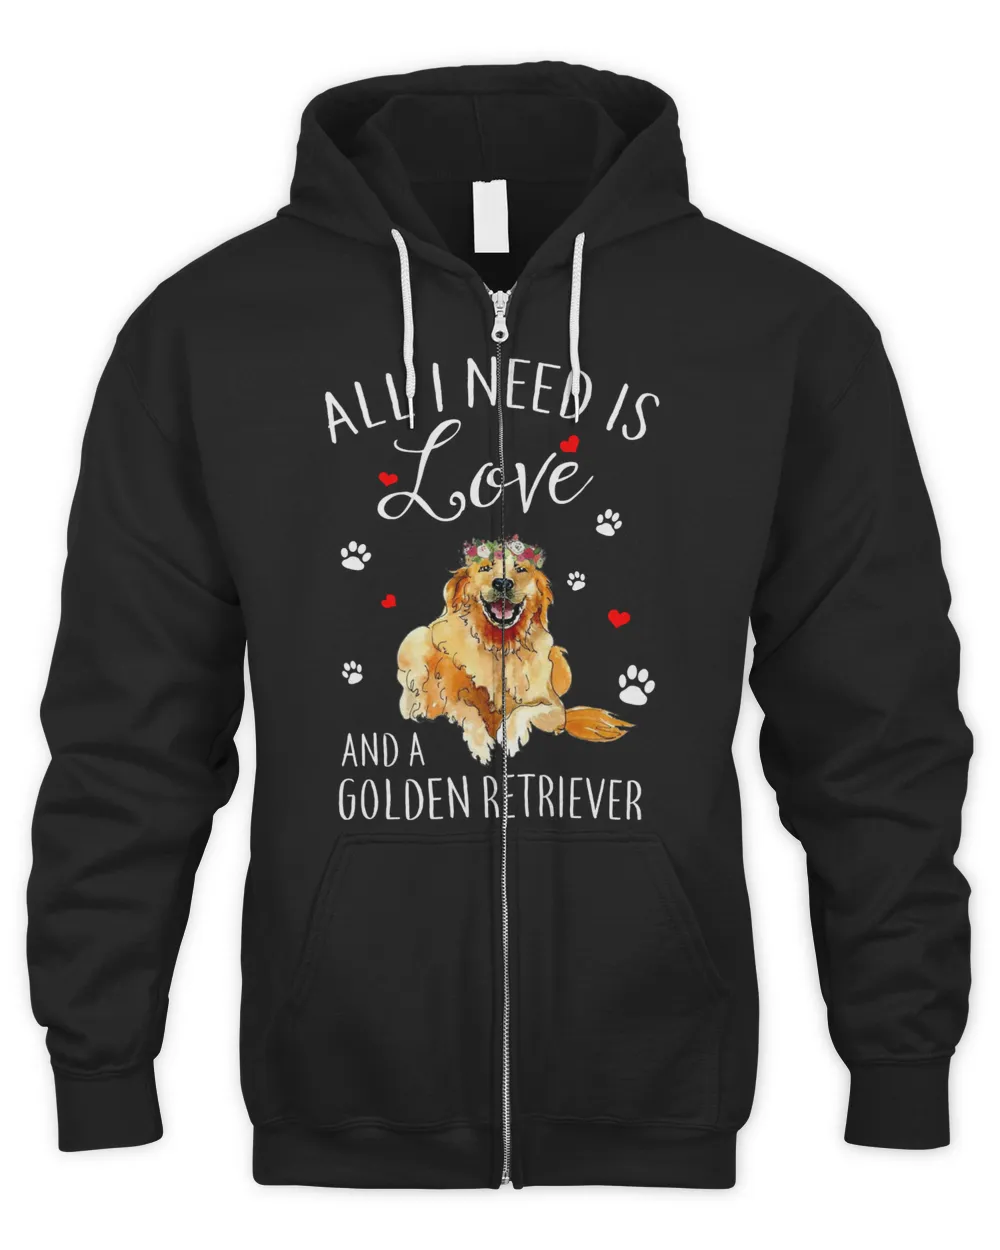 All i Need is Love And a Golden Retriever t shirt